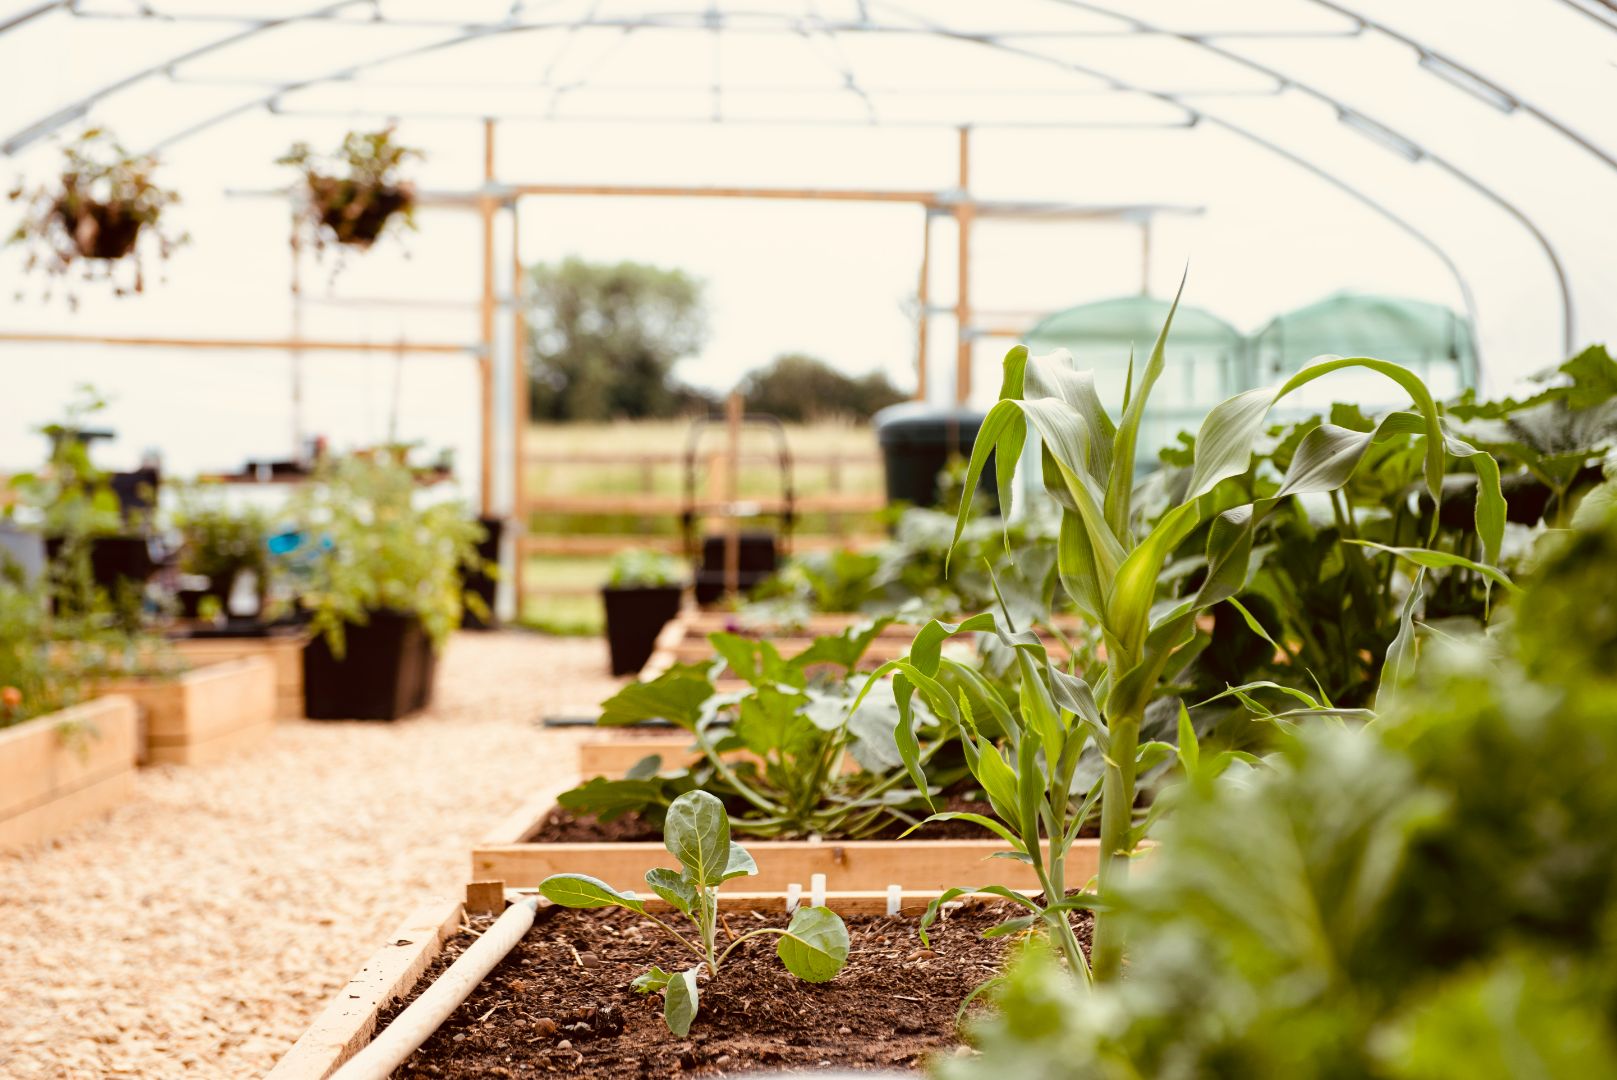 The First Blog: The Polytunnel